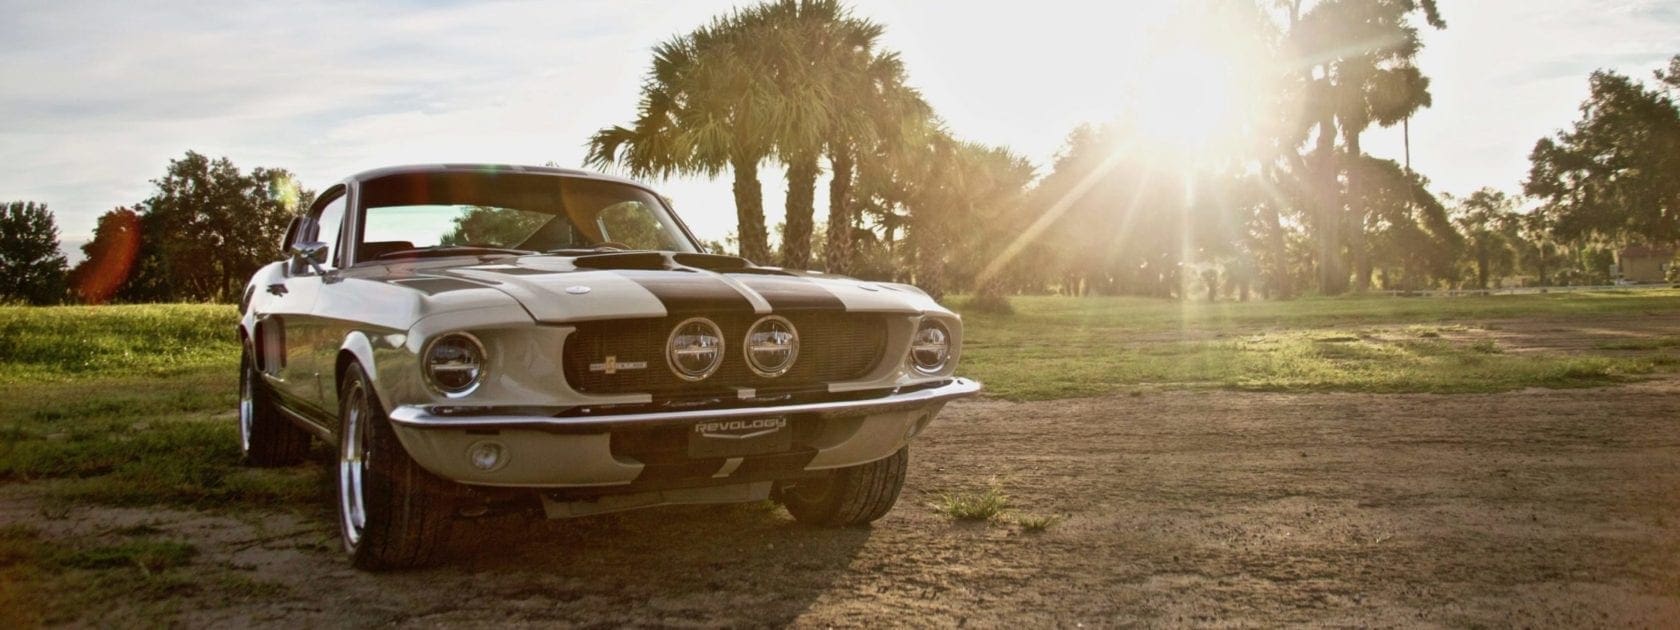 Revology Ford Mustang Replica is a Subtly Modern Take on the Original